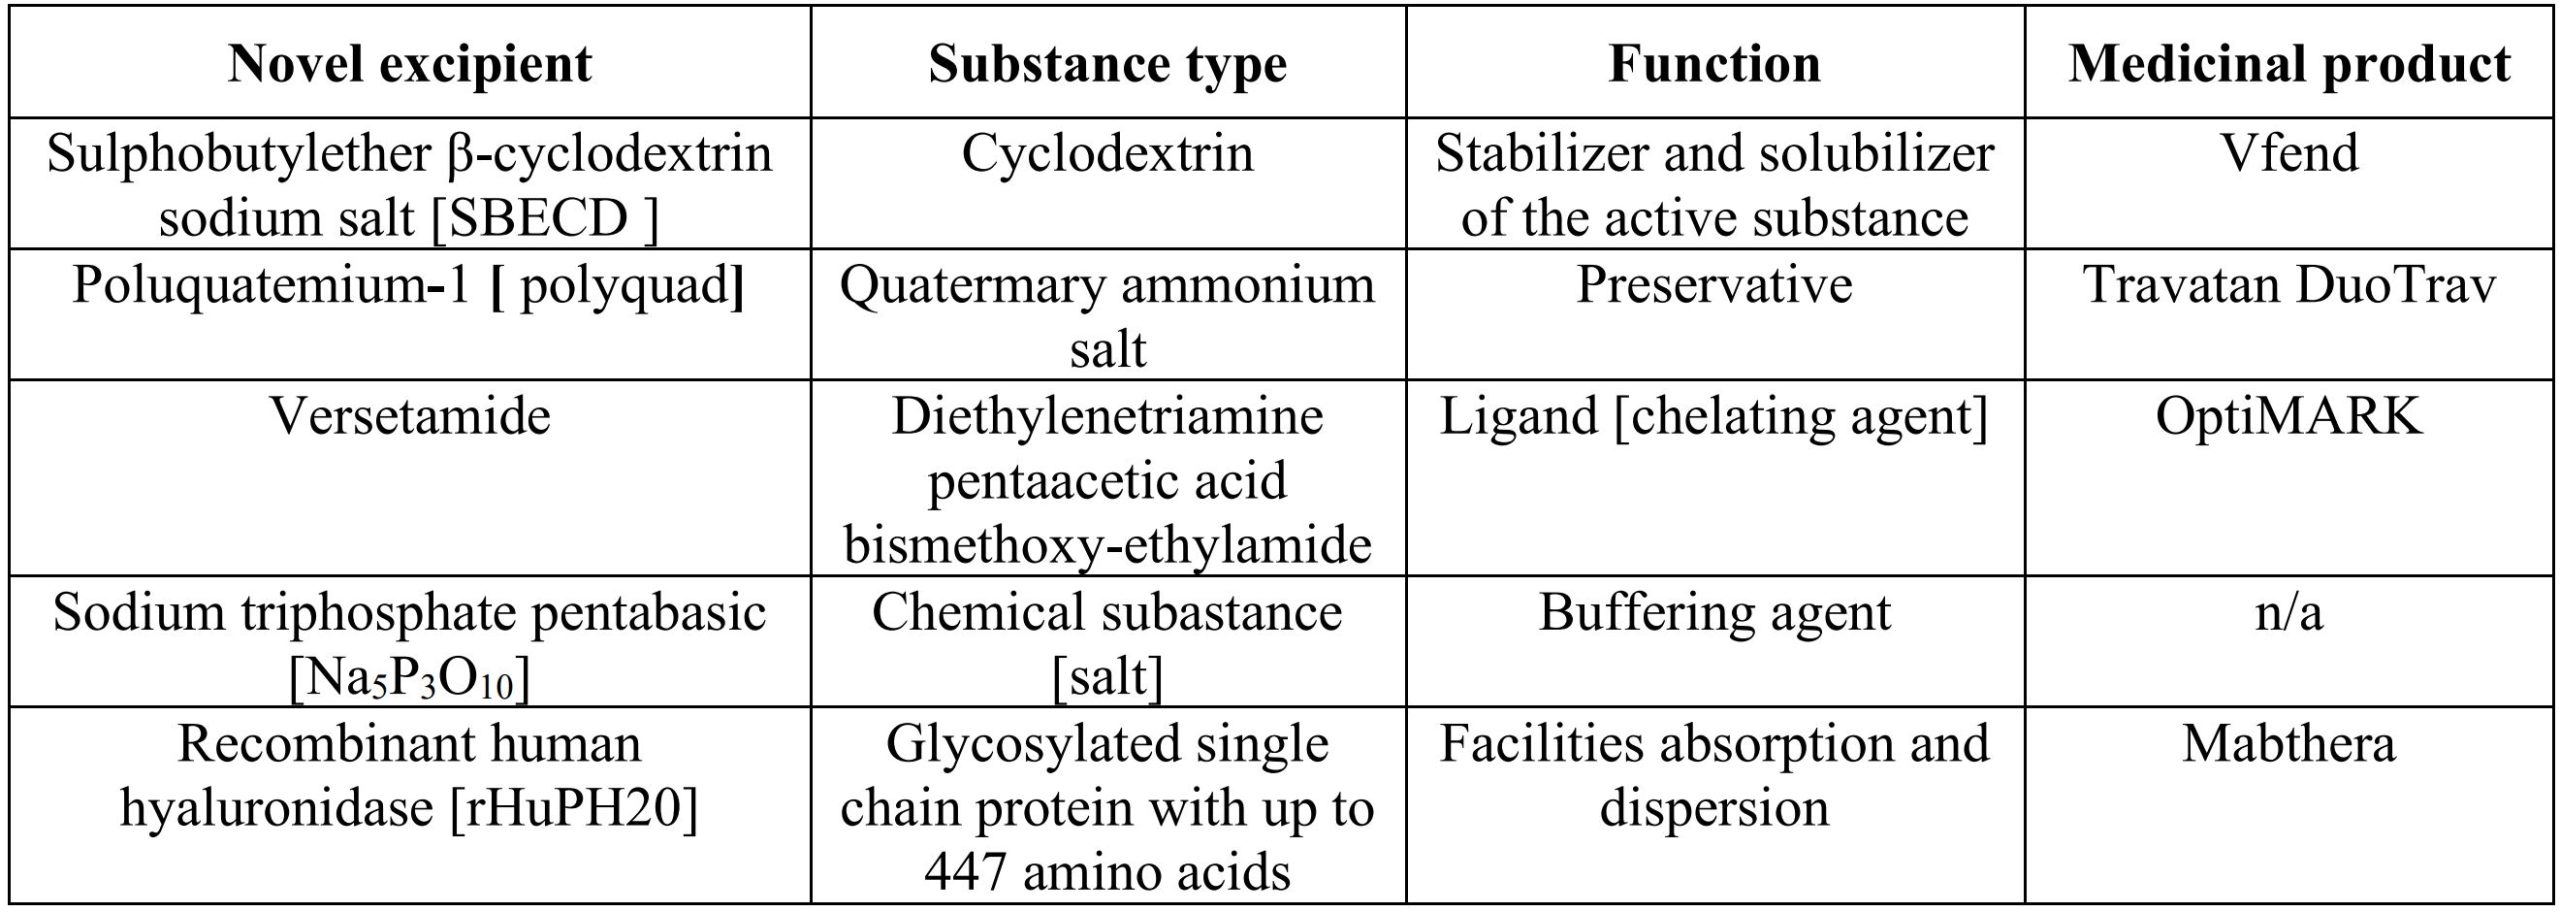 Table 2: Instances of substances that have been employed and assessed as new excipients in medicinal products authorized through the centralized procedure in the EU.